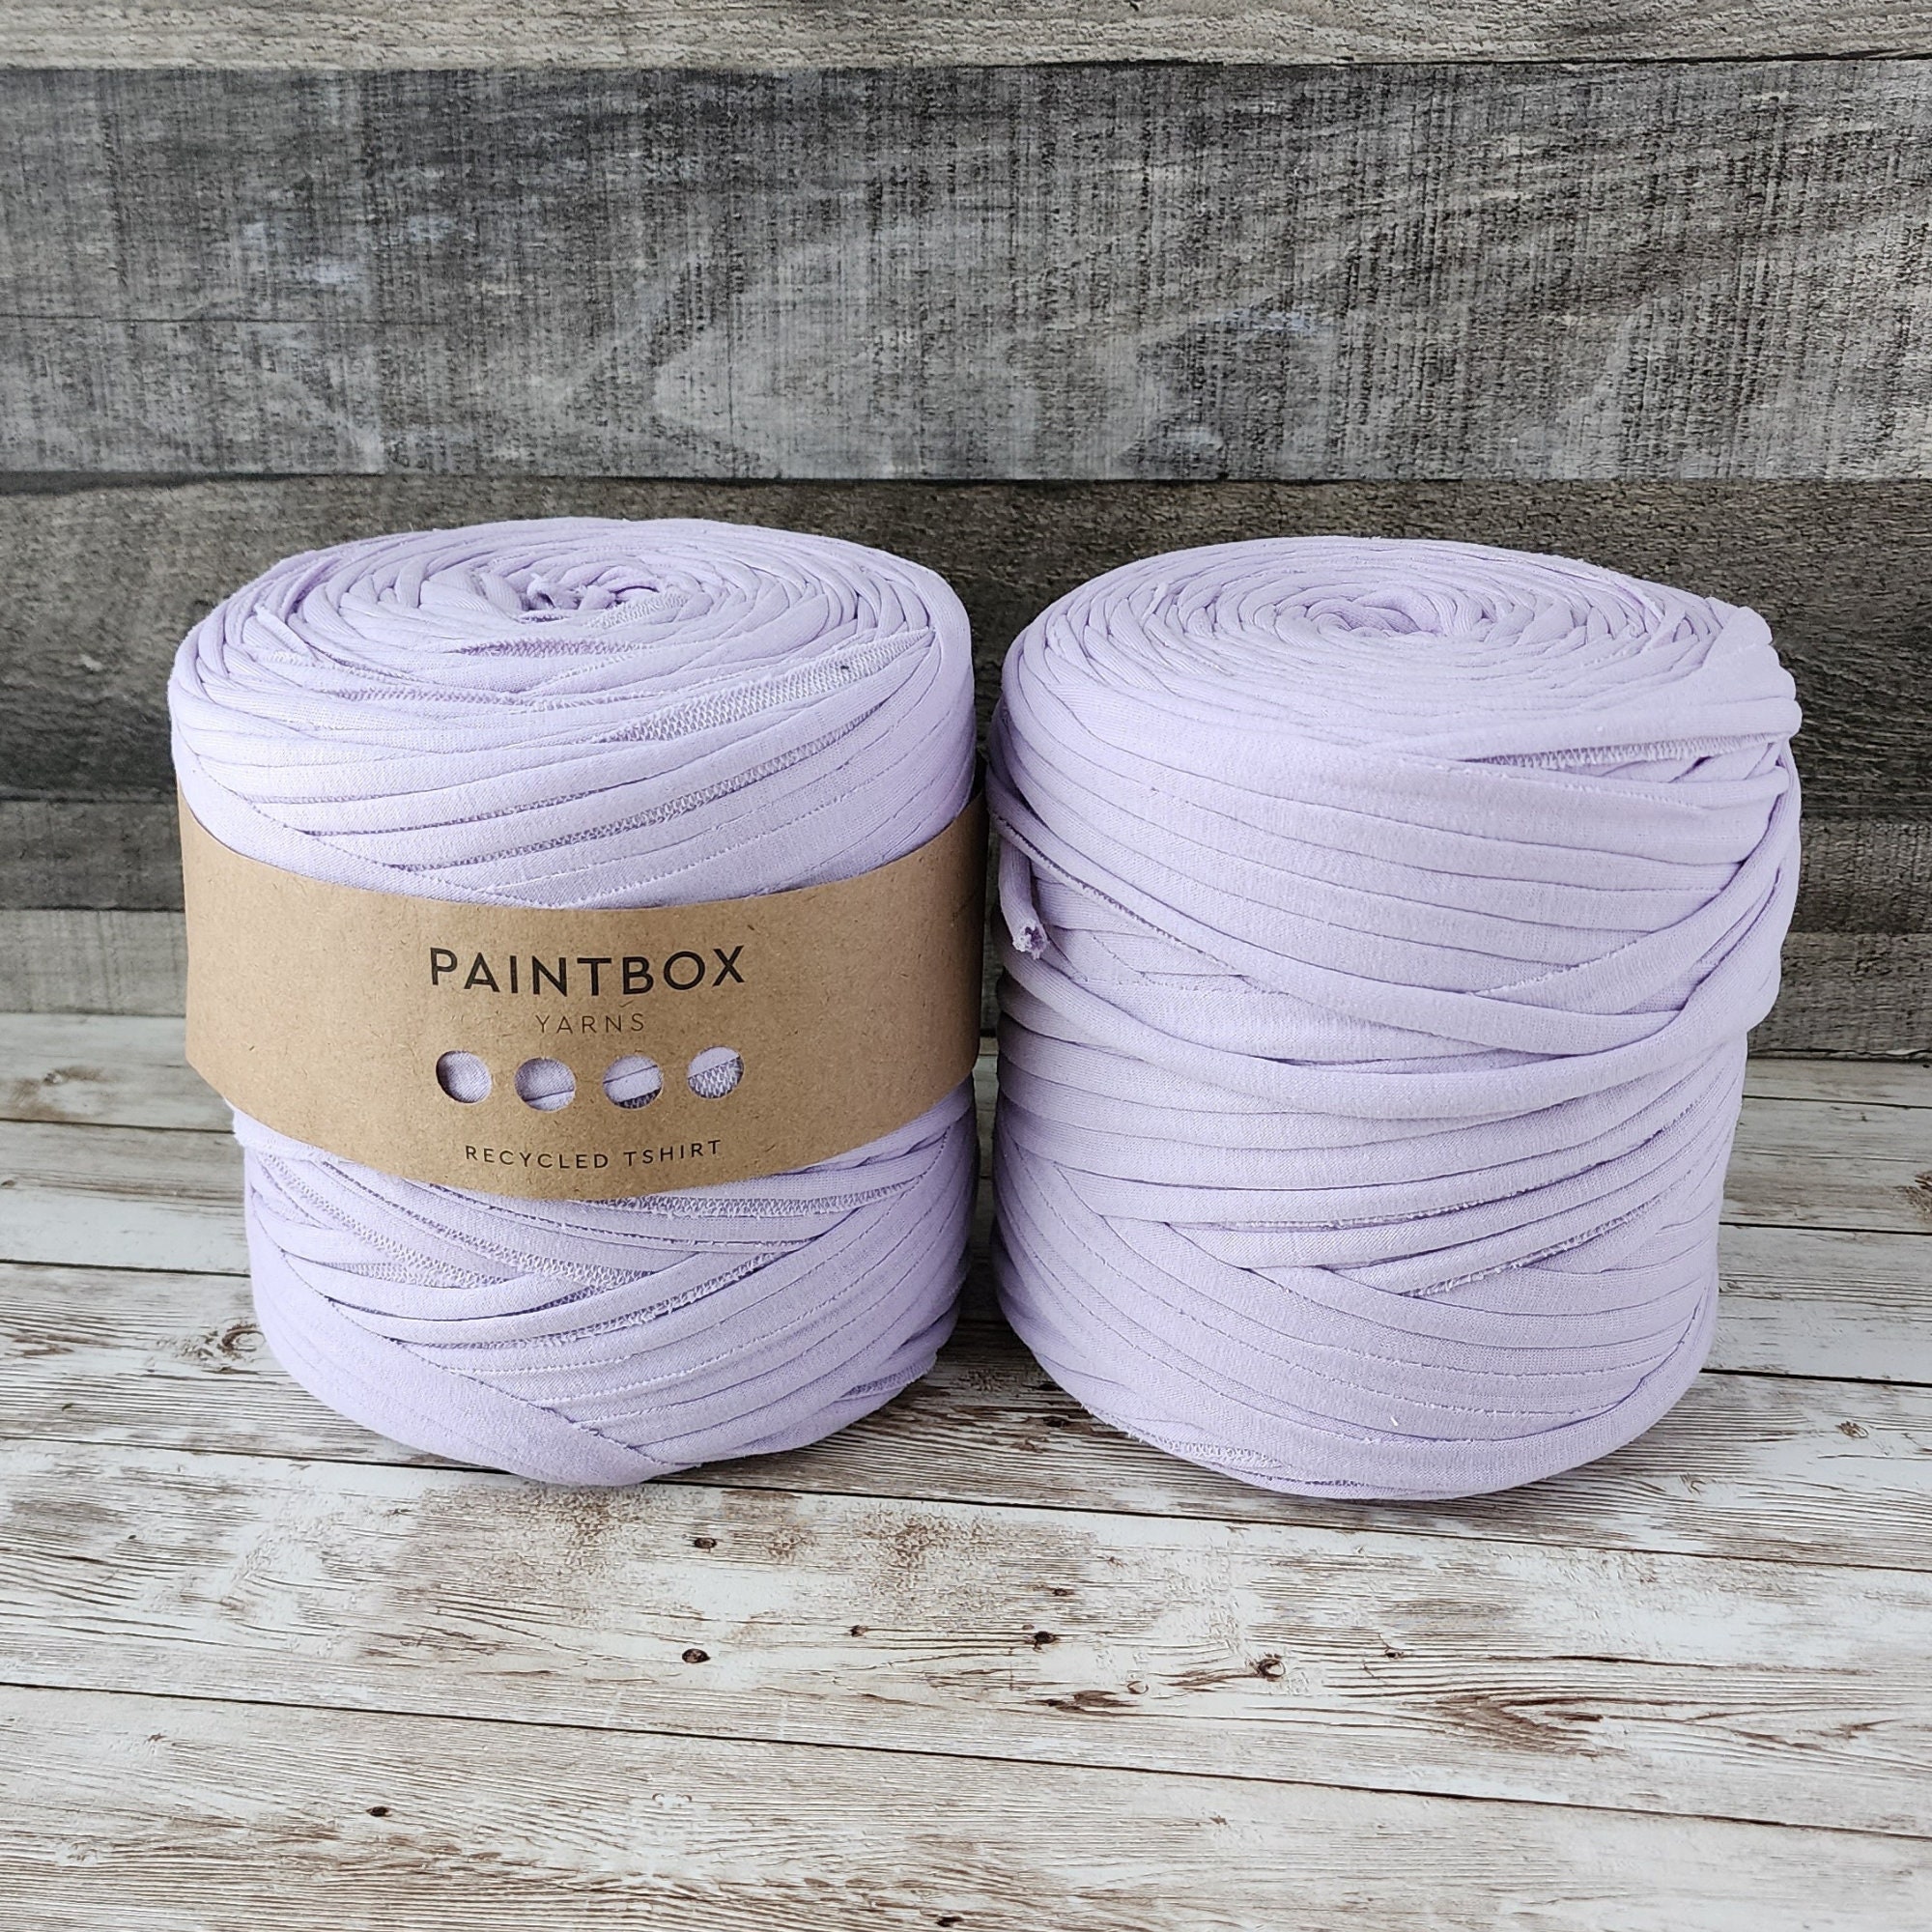 Paintbox, Office, 4 Skeins Paintbox 10 Cotton Dk Yarn Pinks And Purples  New